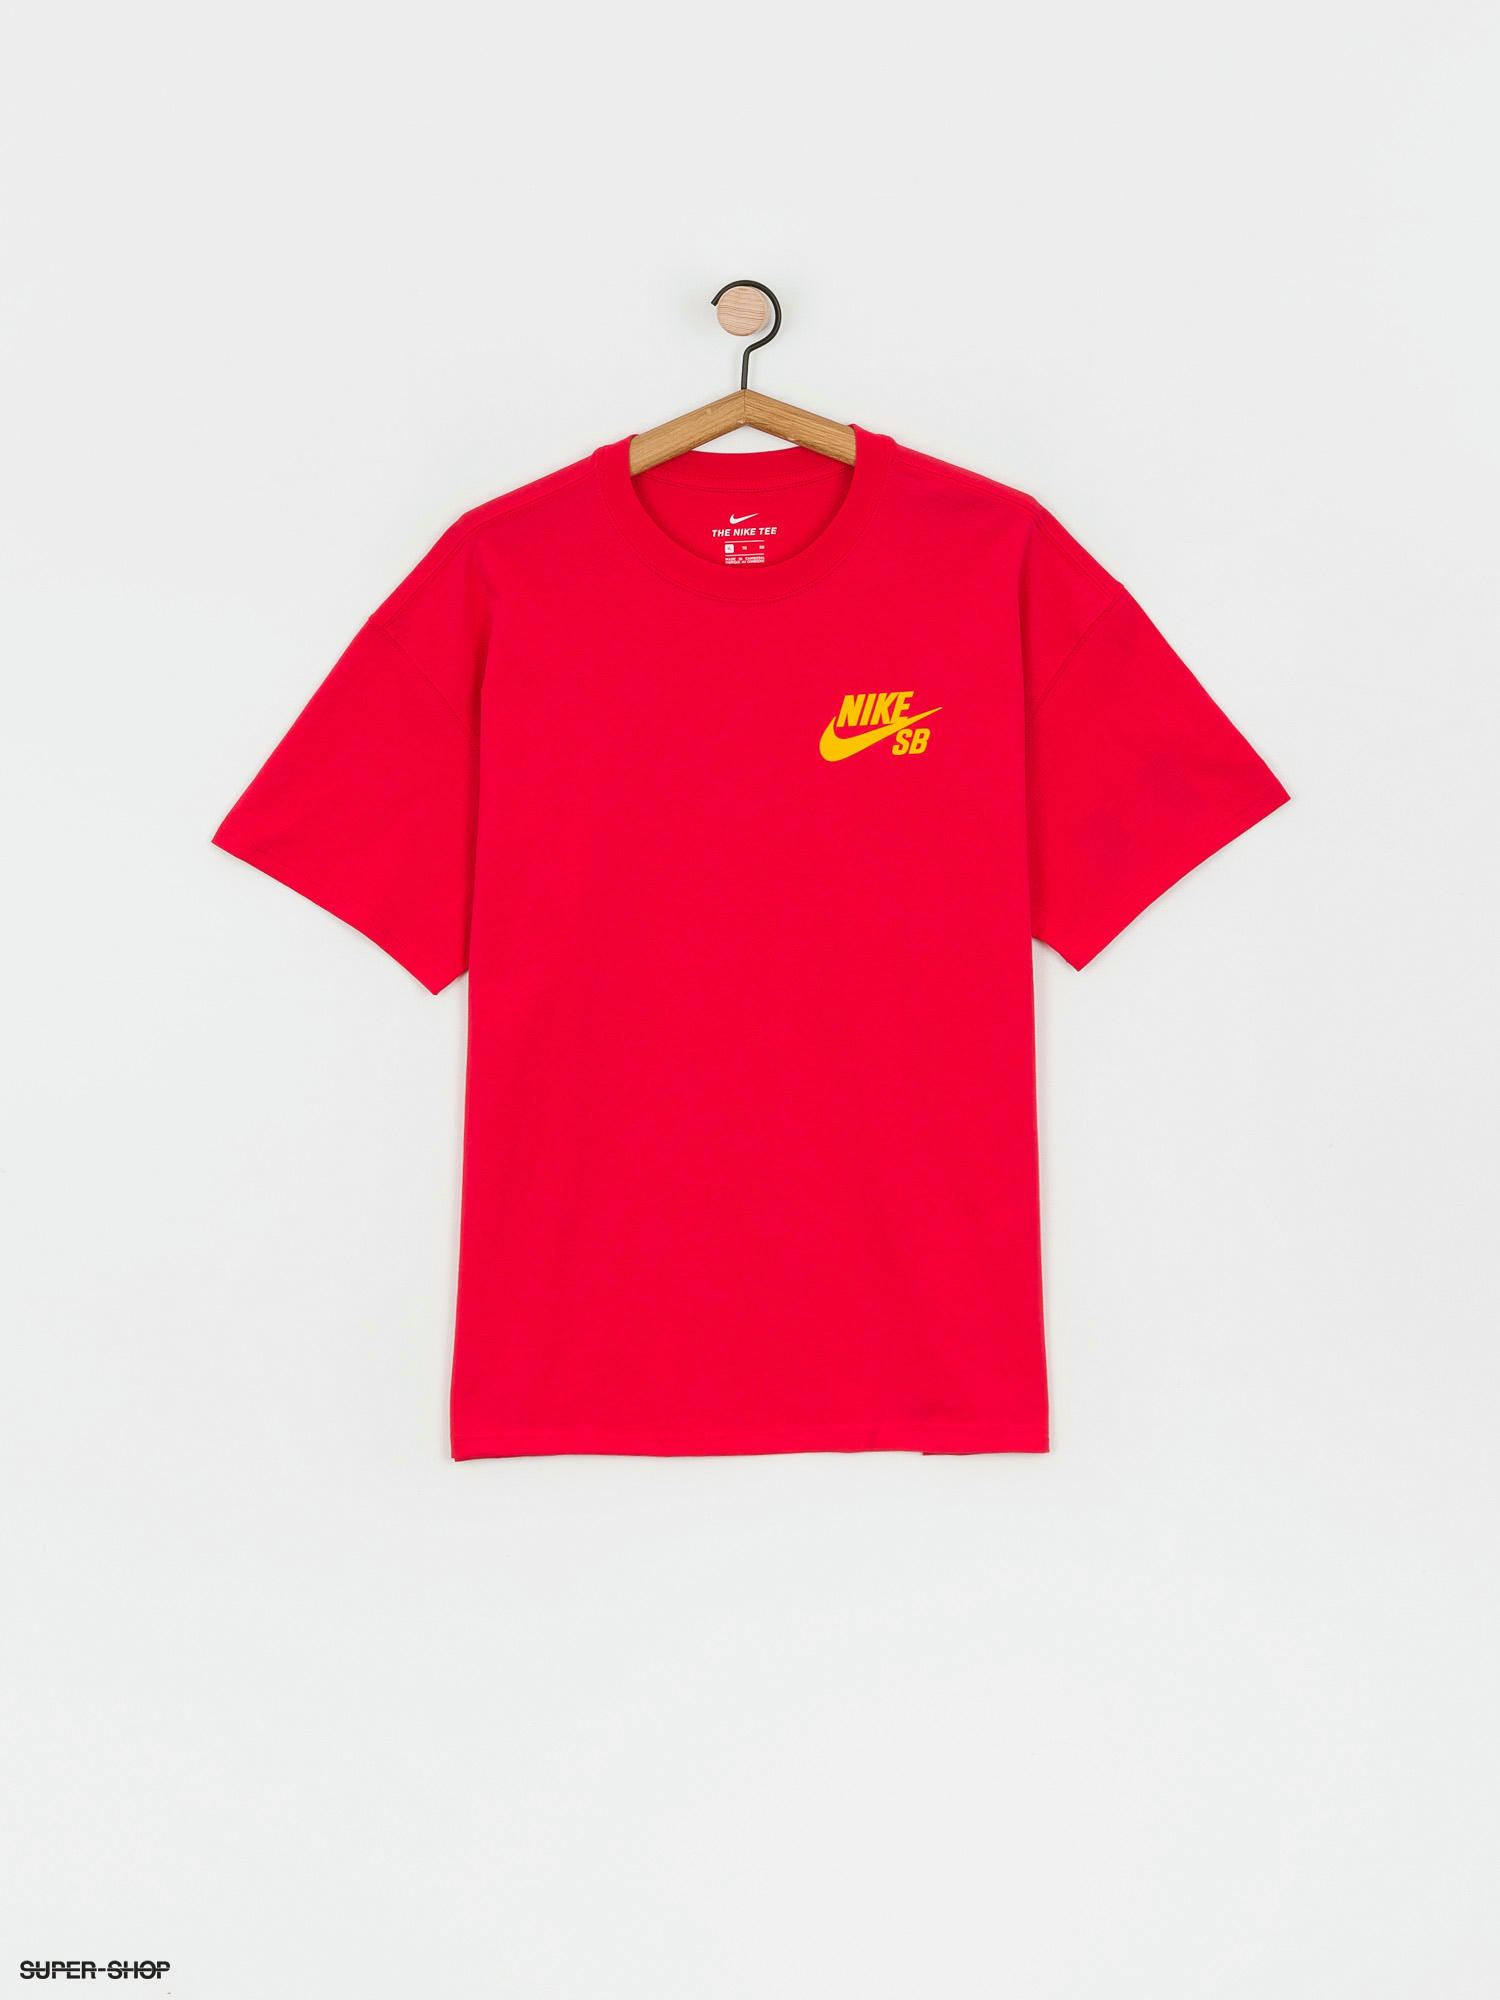 nike red and gold shirt